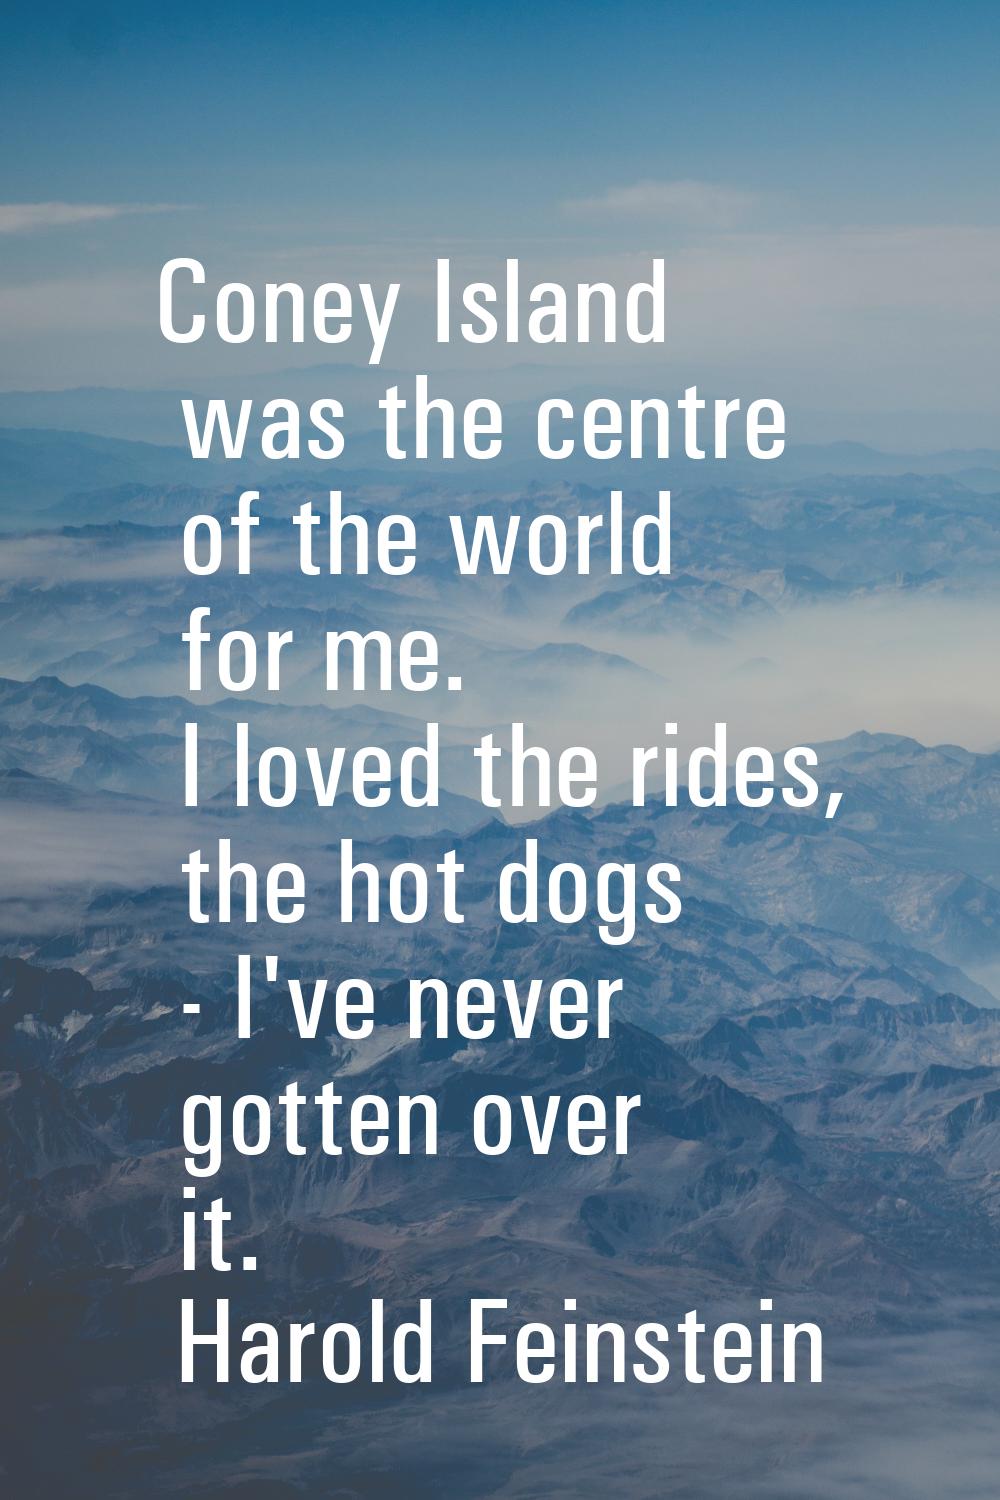 Coney Island was the centre of the world for me. I loved the rides, the hot dogs - I've never gotte